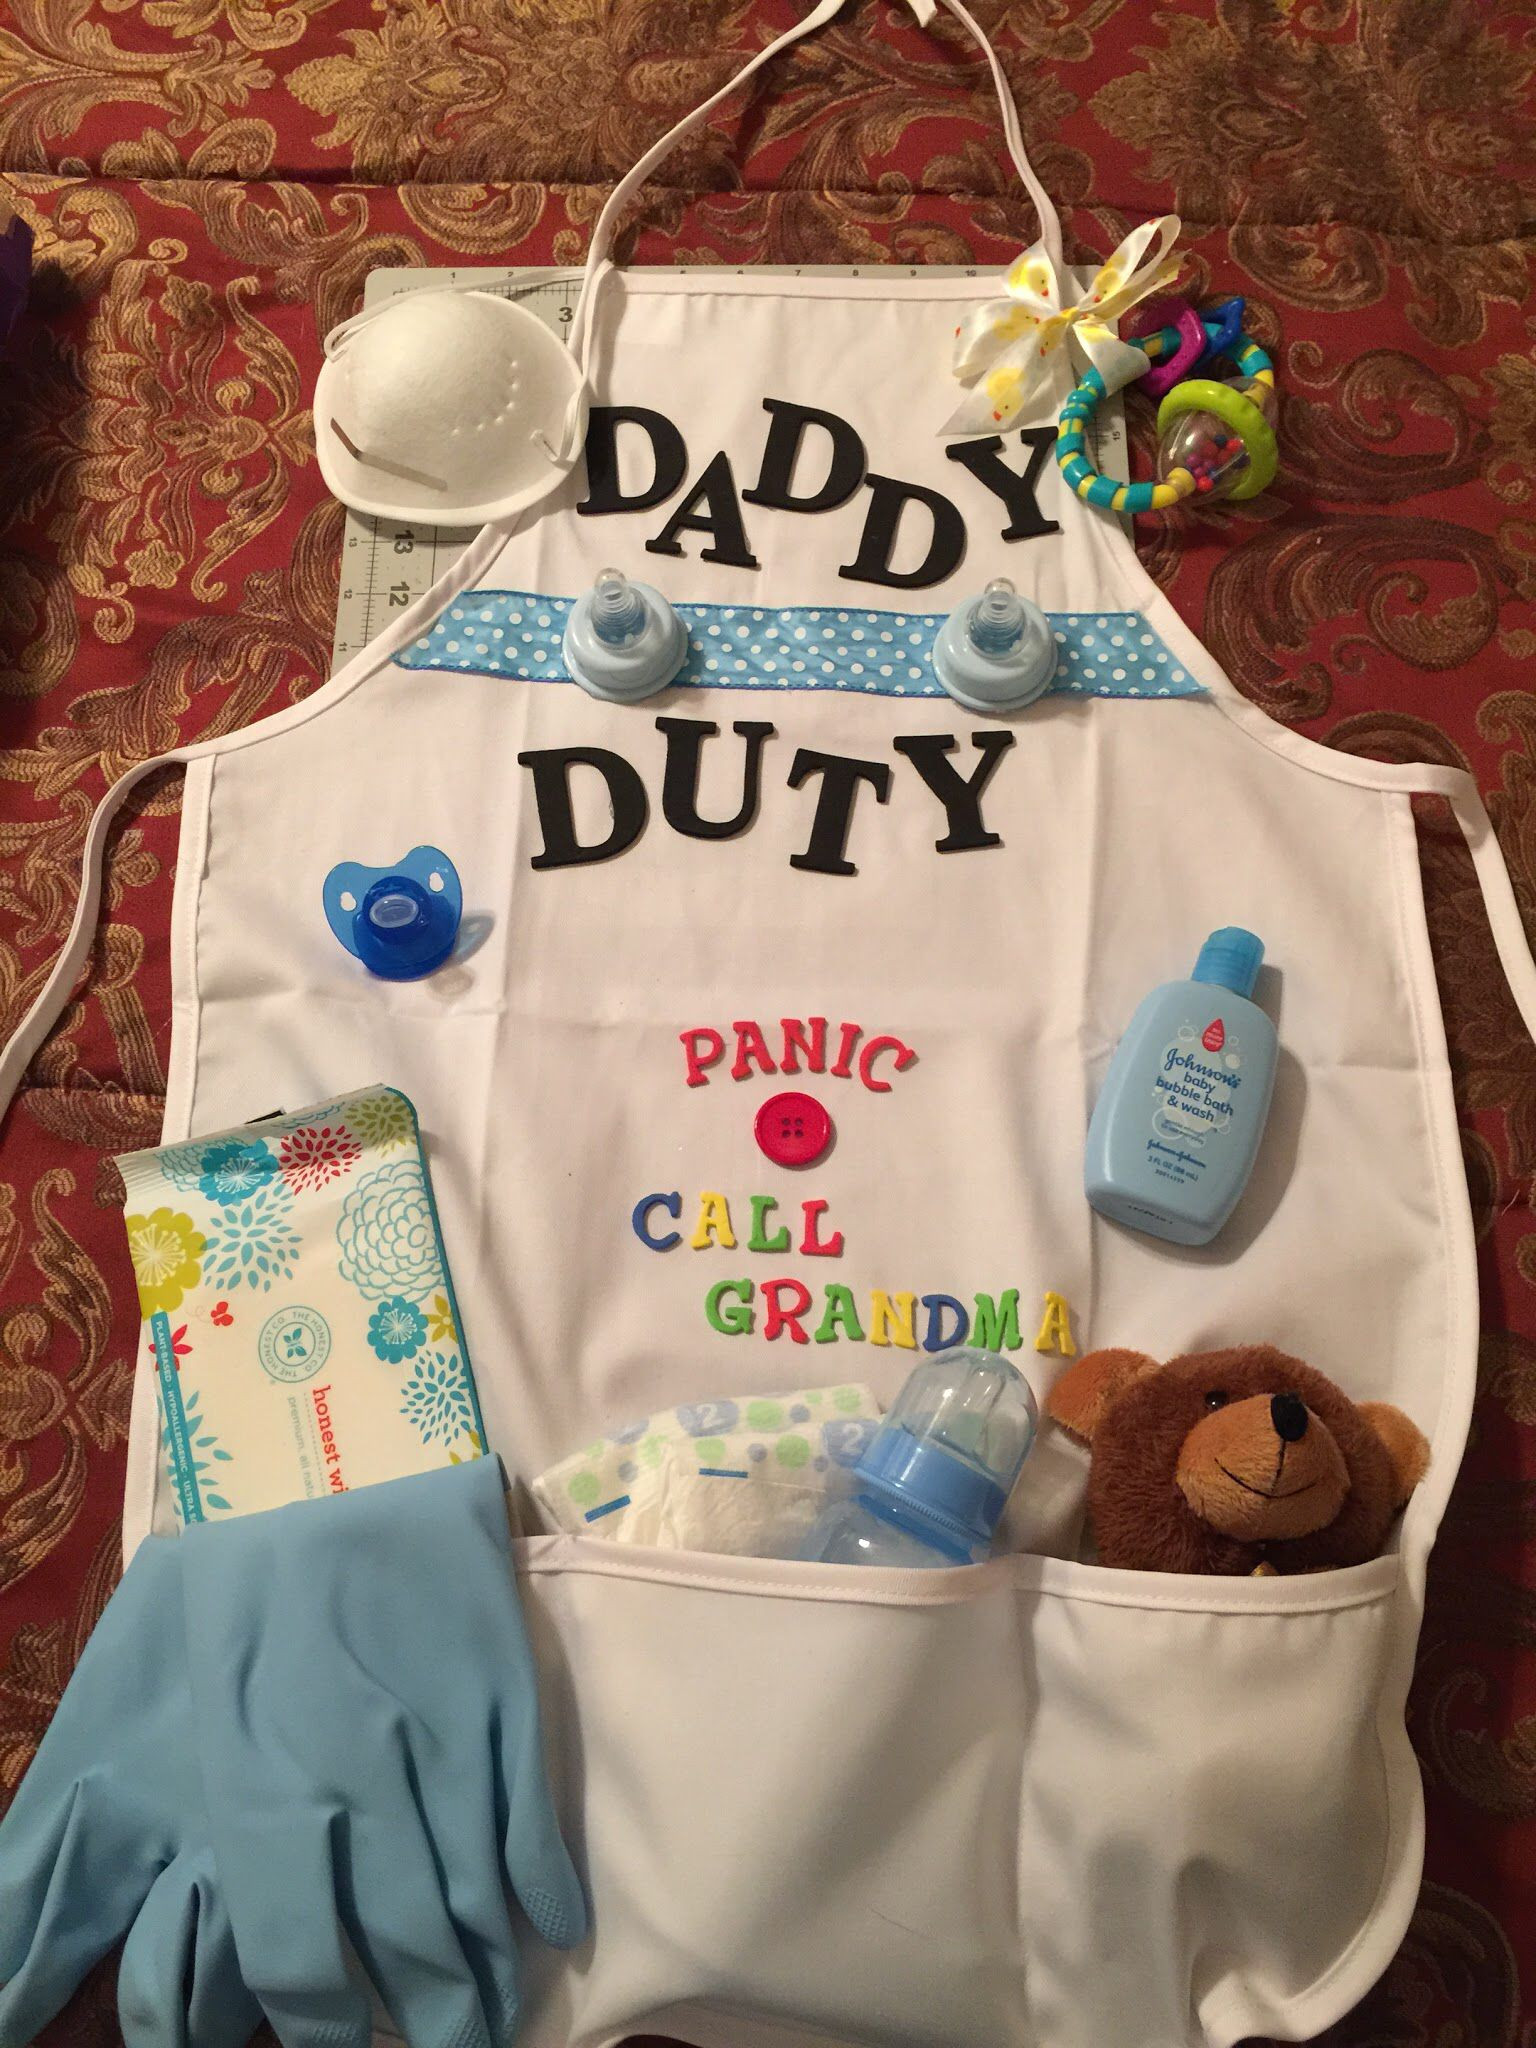 Father To Be Gifts From Baby
 New Dad Diaper Duty apron